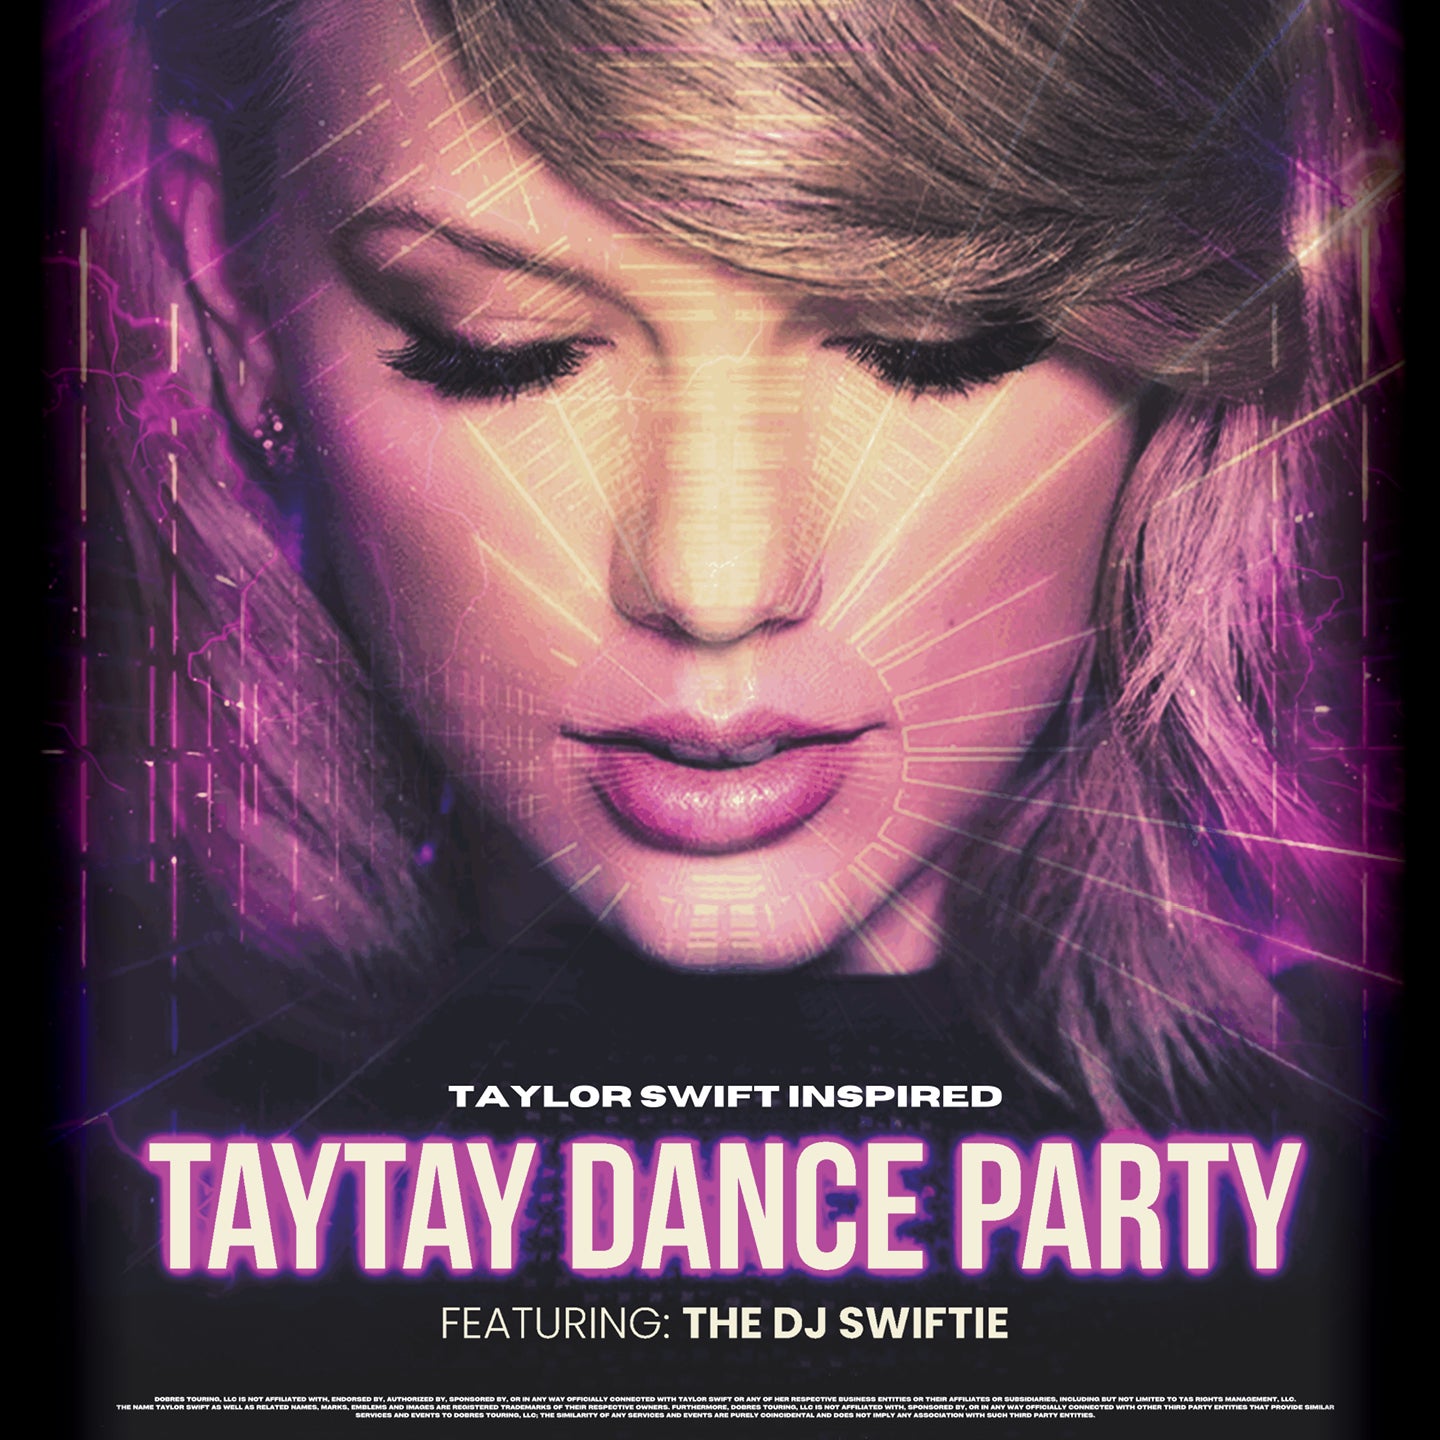 Tay Tay Dance Party